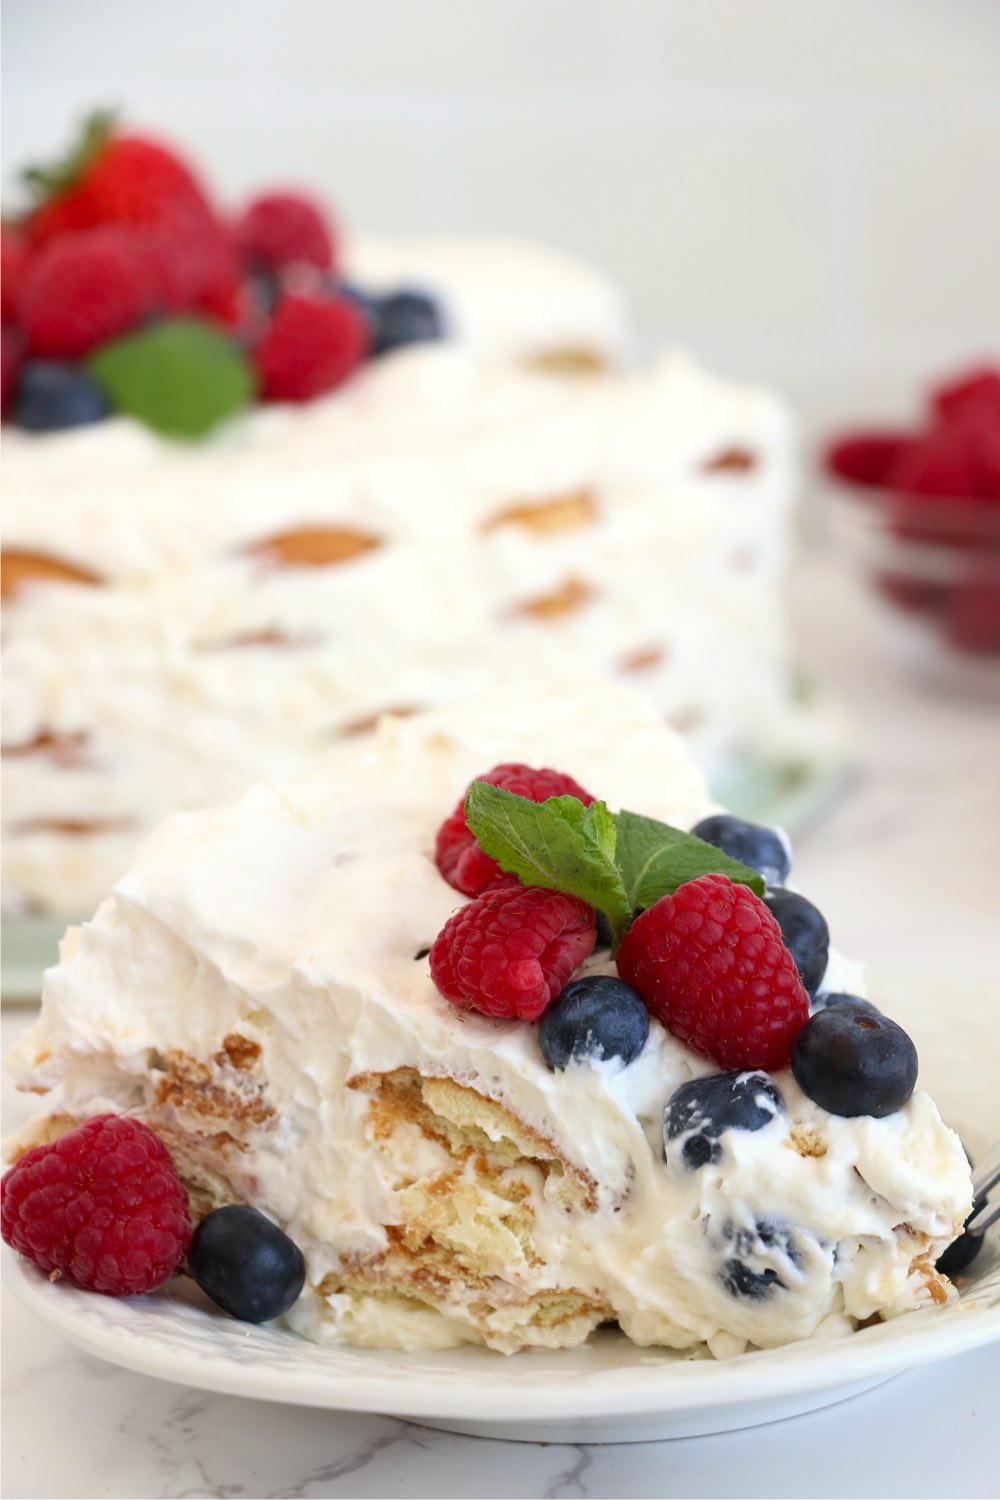 piece of layered cake with berries on top